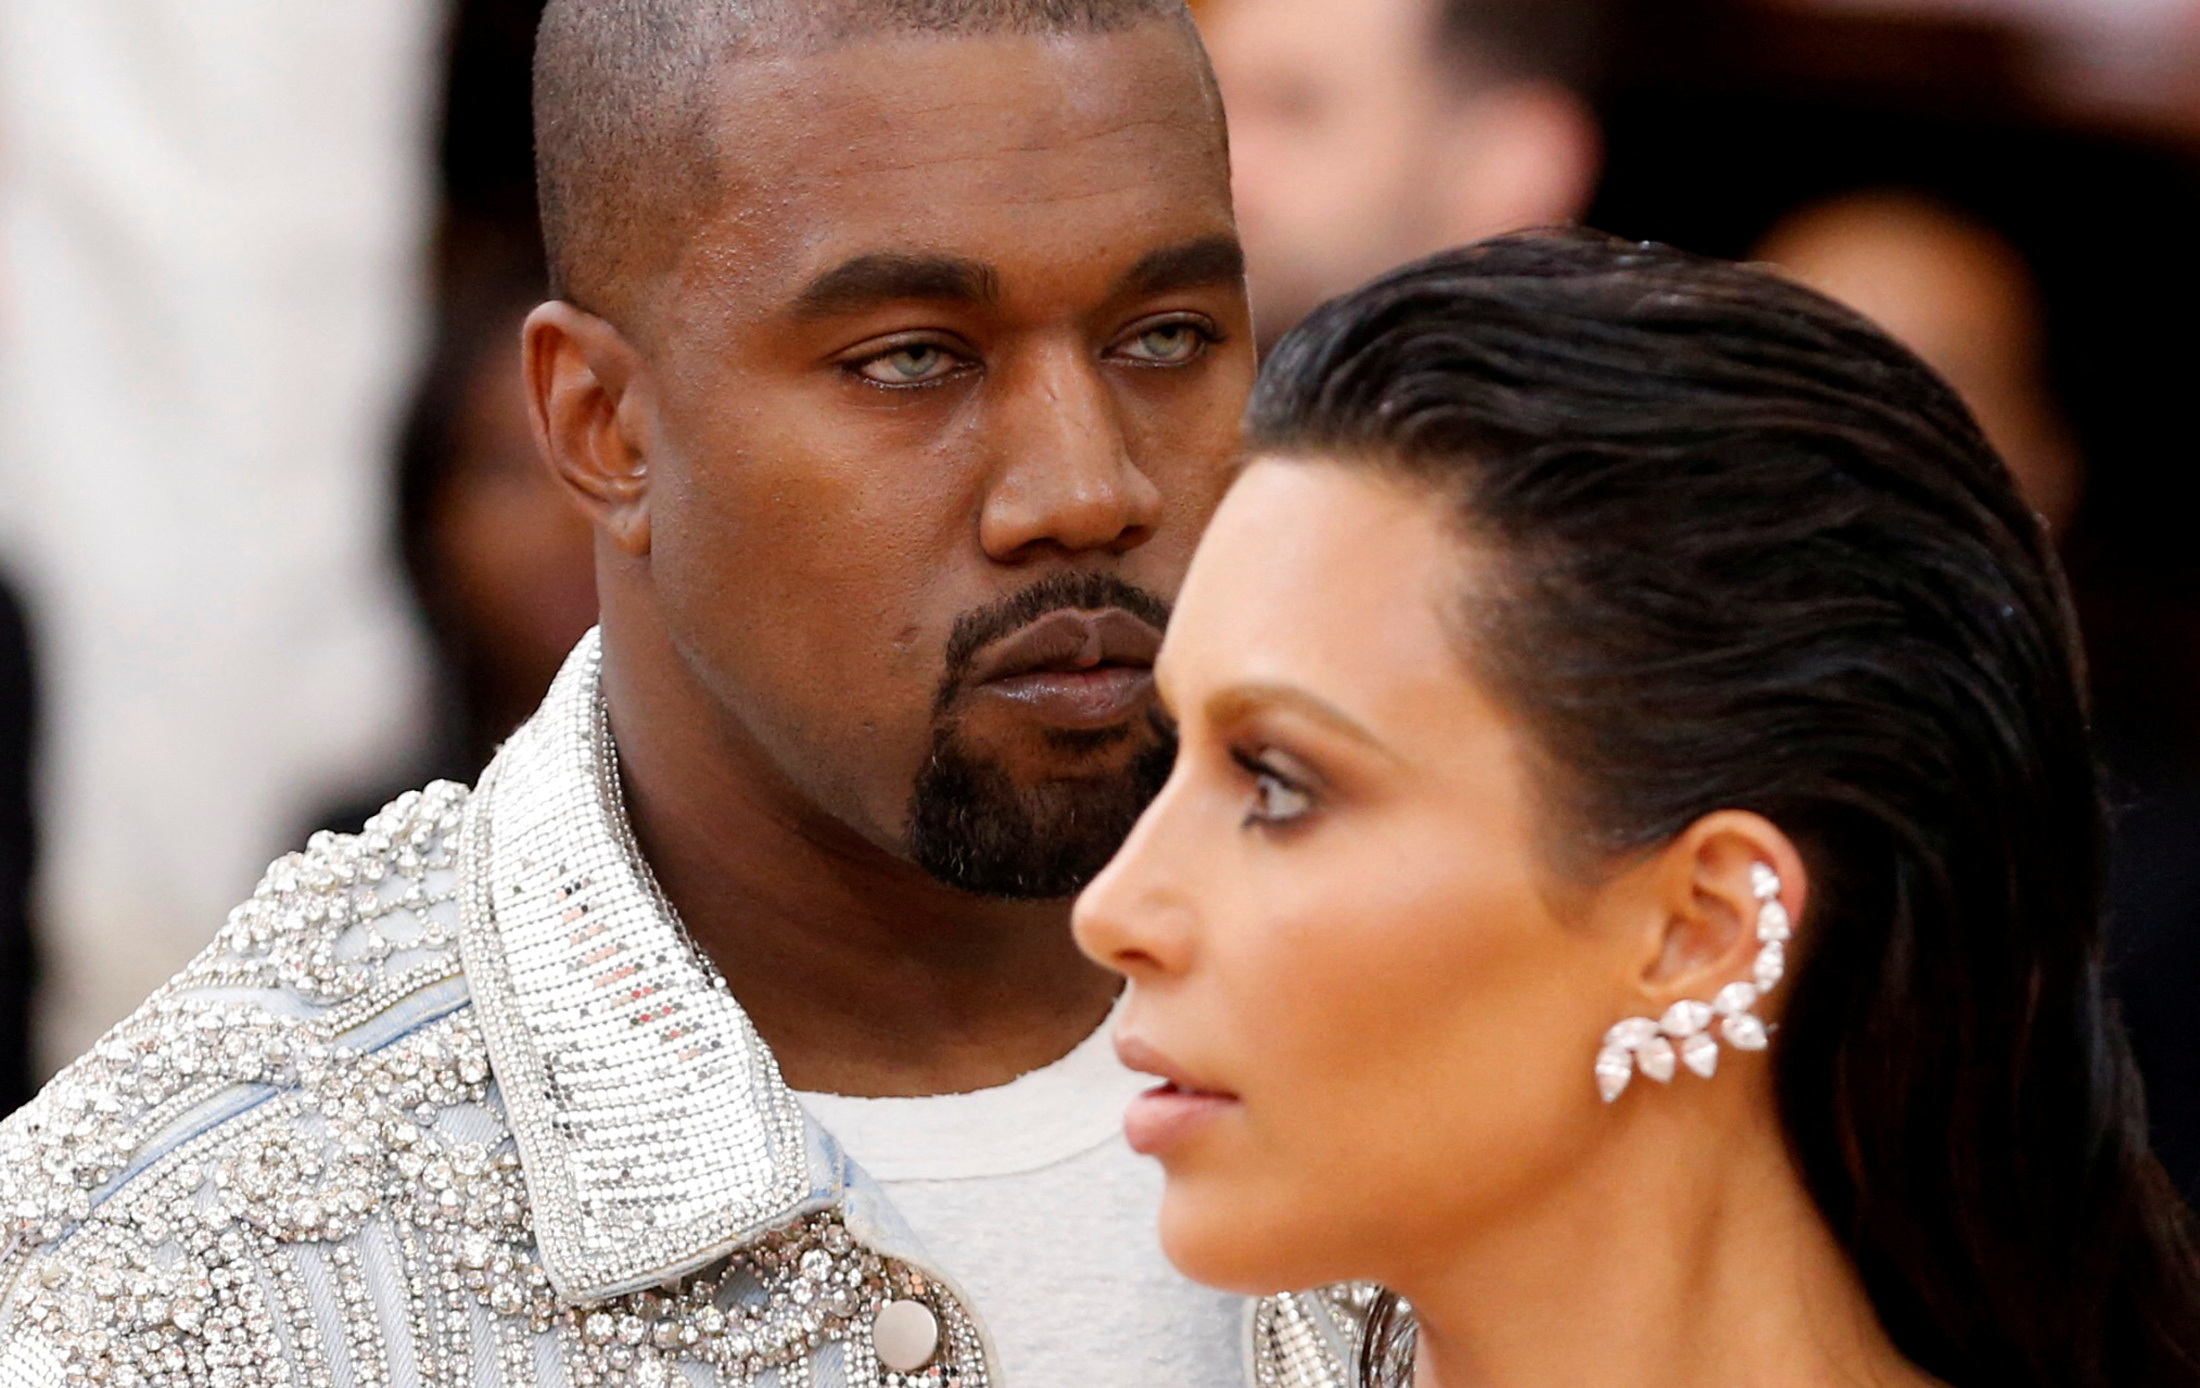 Kim Kardashian and ex-husband Ye, formerly known as Kanye West, attending gala back when they were married